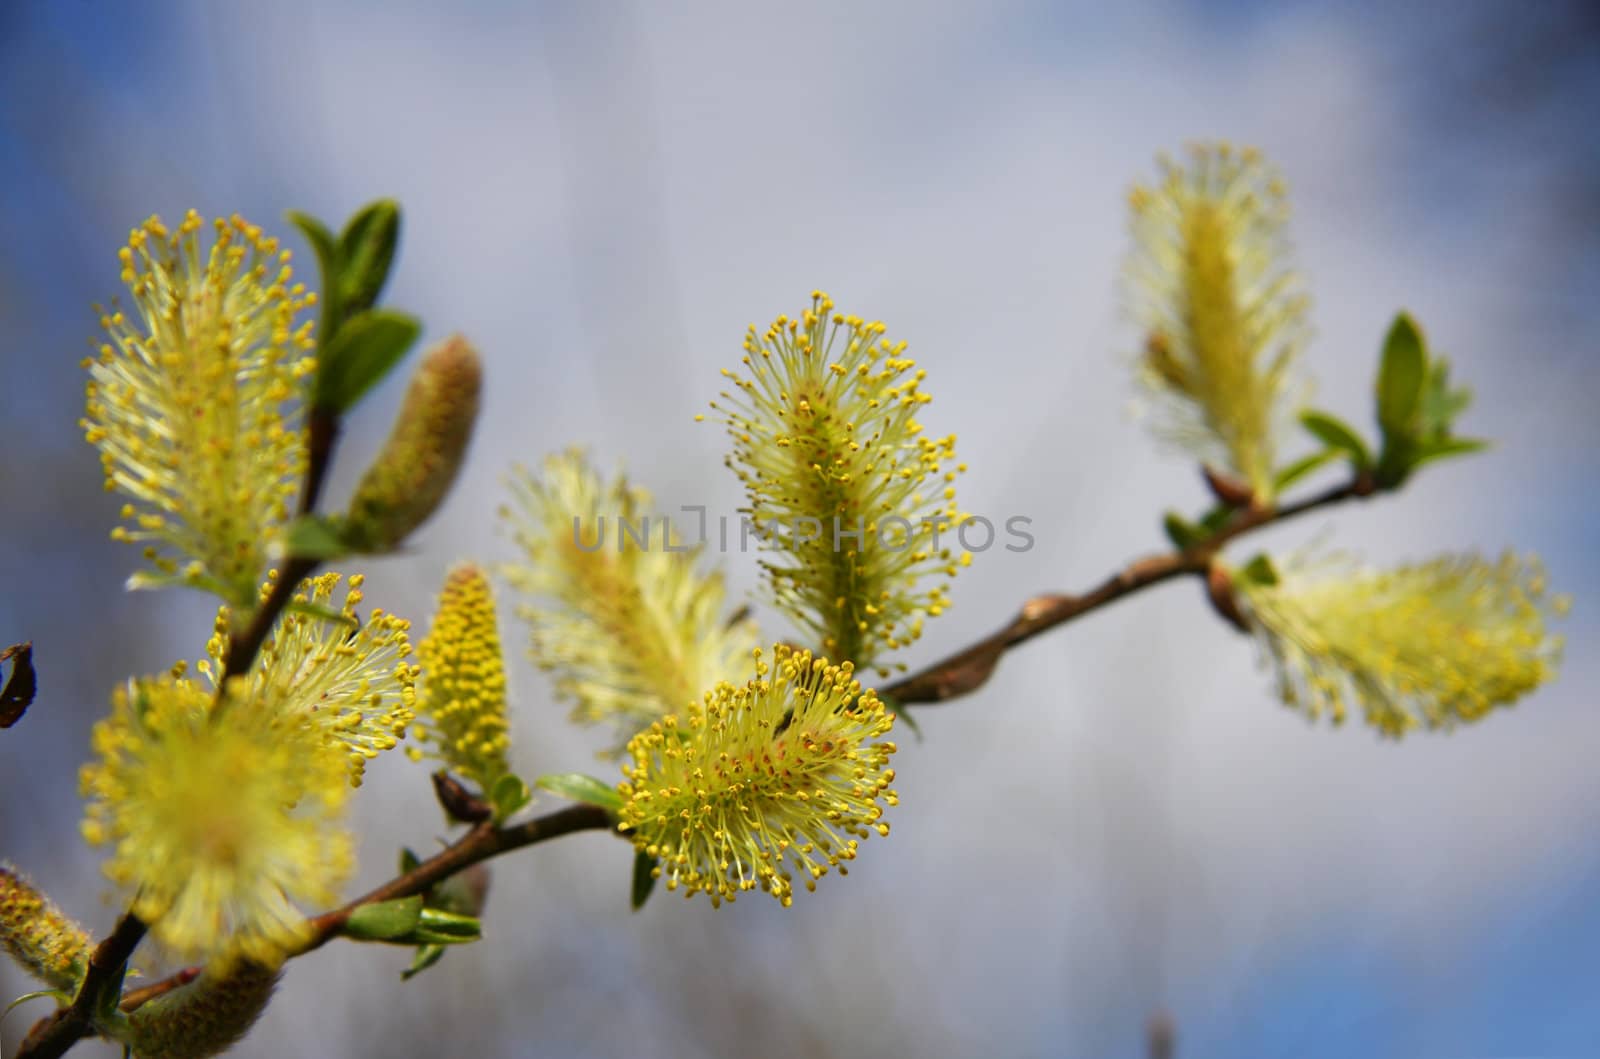 Blossoming willow with catkins by snowturtle